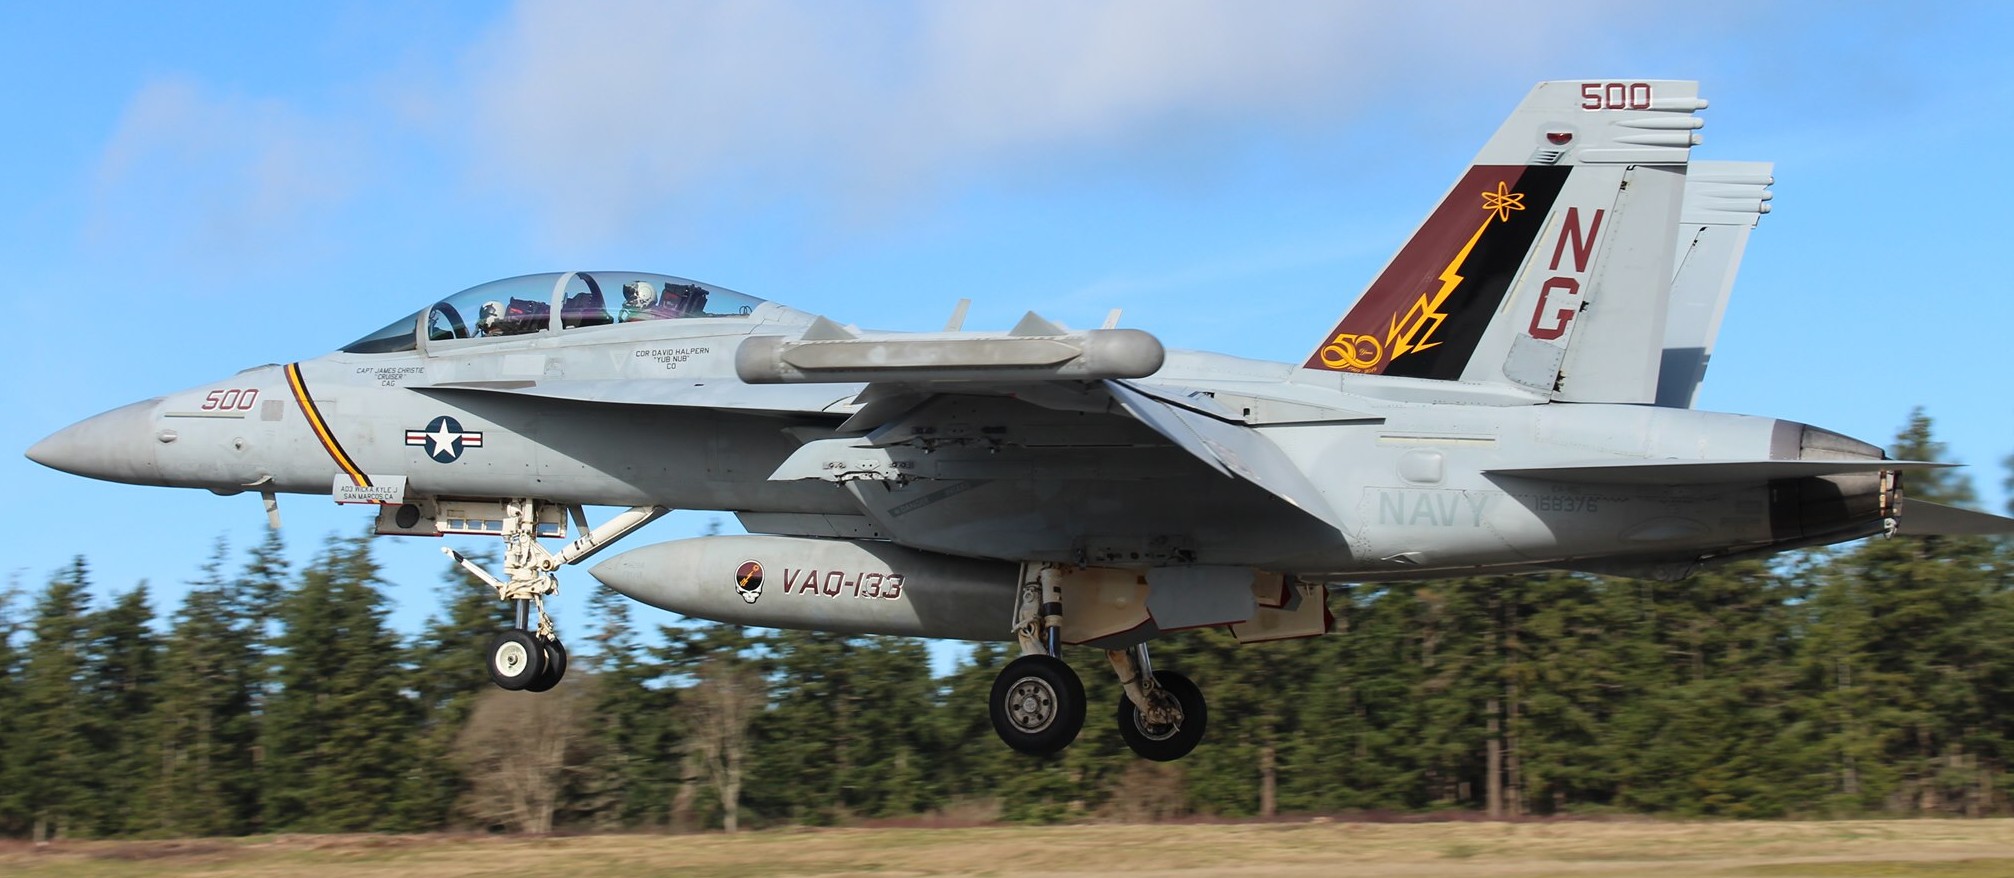 vaq-133 wizards electronic attack squadron vaqron us navy boeing ea-18g growler nas whidbey island uss cvn 66x